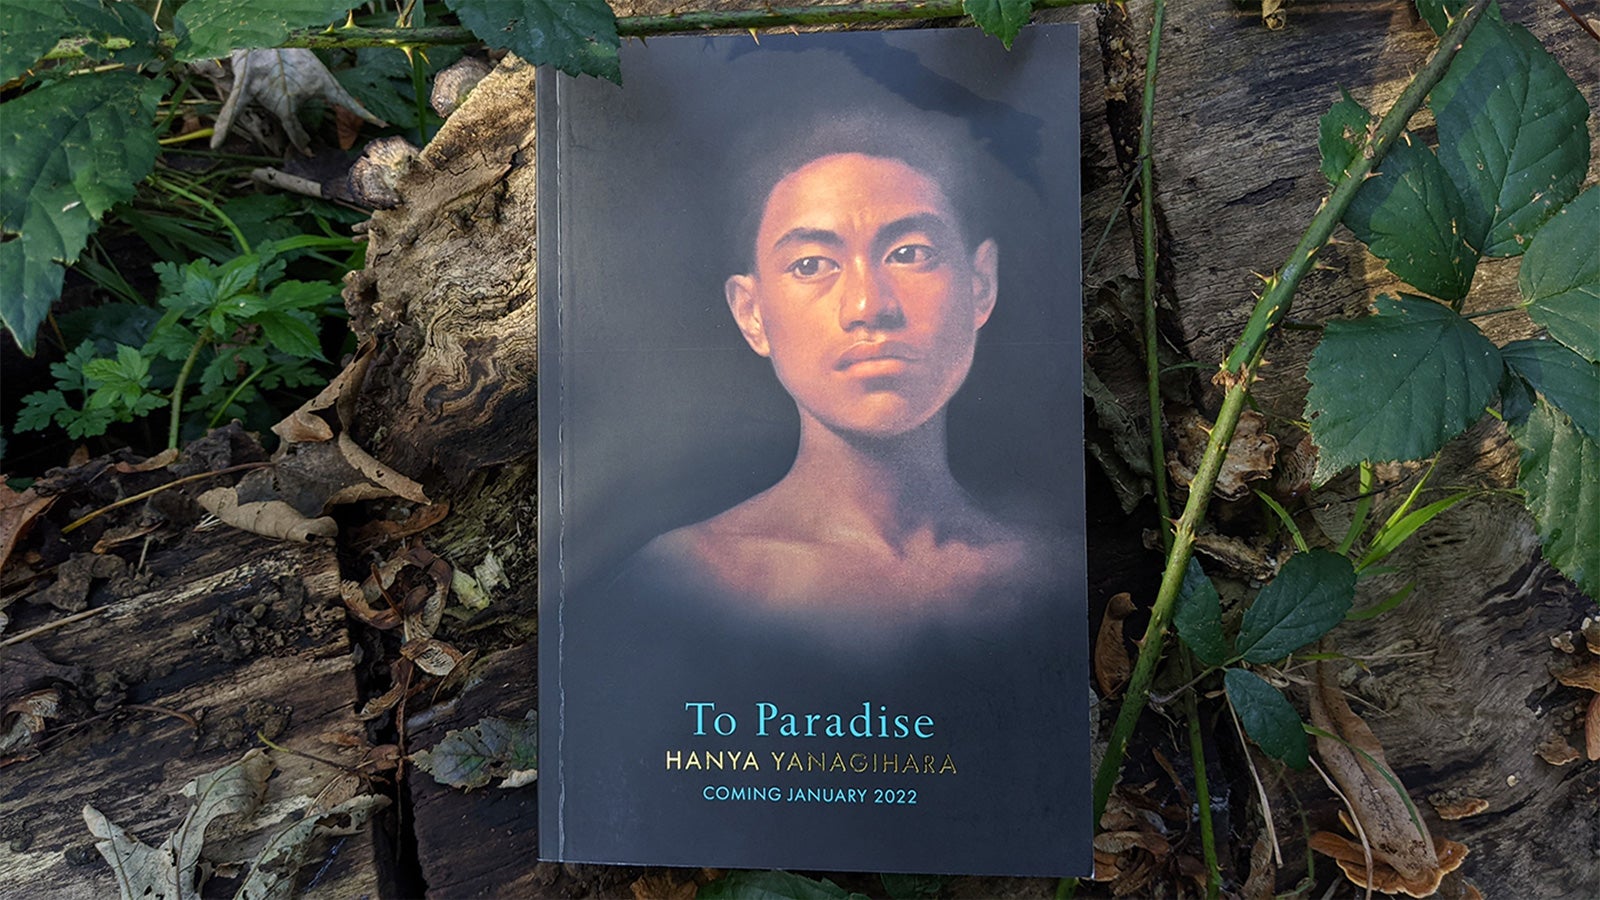 An exclusive proof copy of To Paradise by Hanya Yanagihara is positioned artfully on the forest floor.